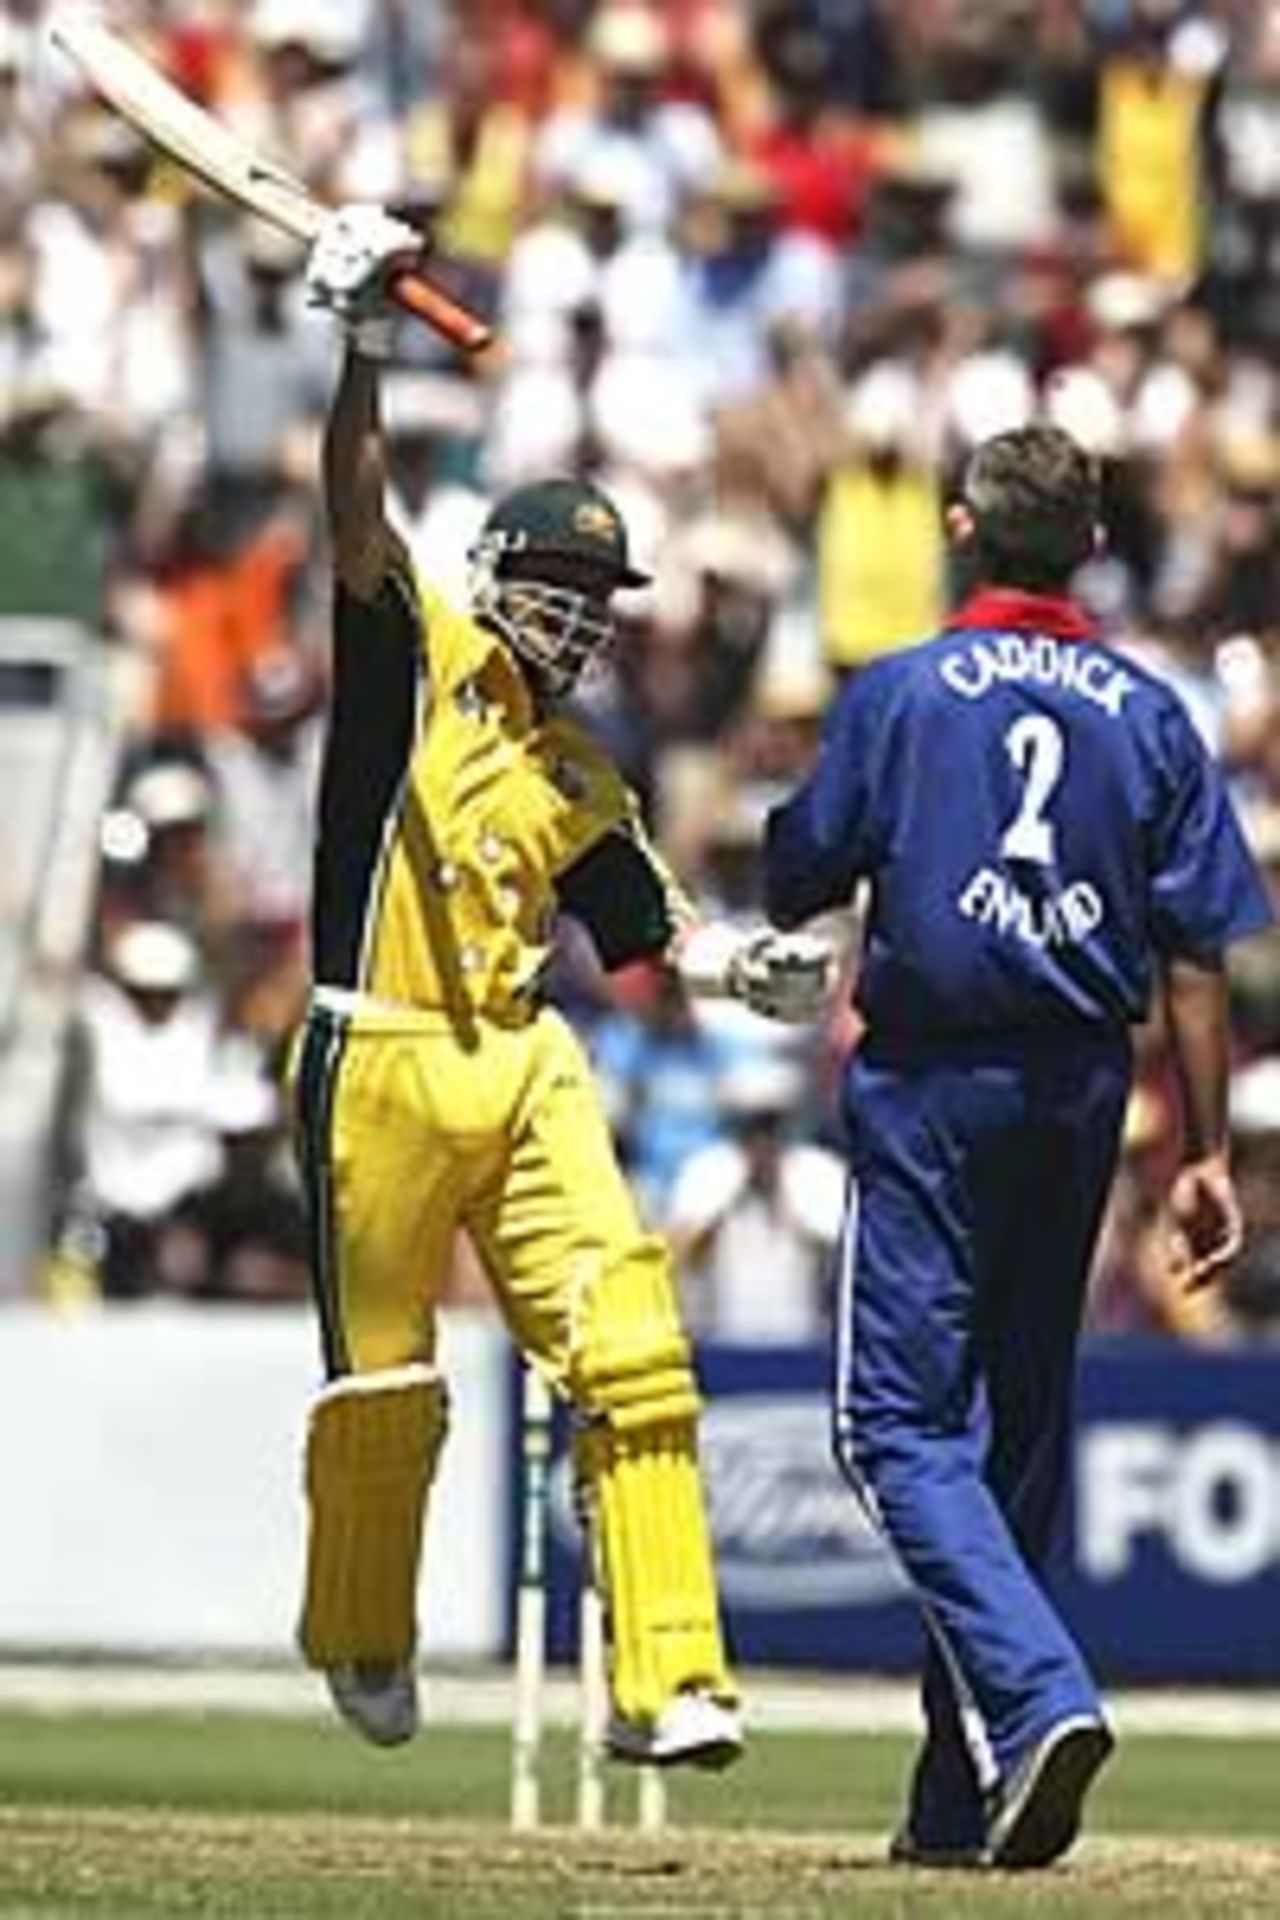 HOBART - JANUARY 11: Damien Martyn of Australia celebrates his century brought up off the last ball of the innings during the One Day International match between Australia and England at Bellerive Oval in Hobart, Australia on January 11, 2003.